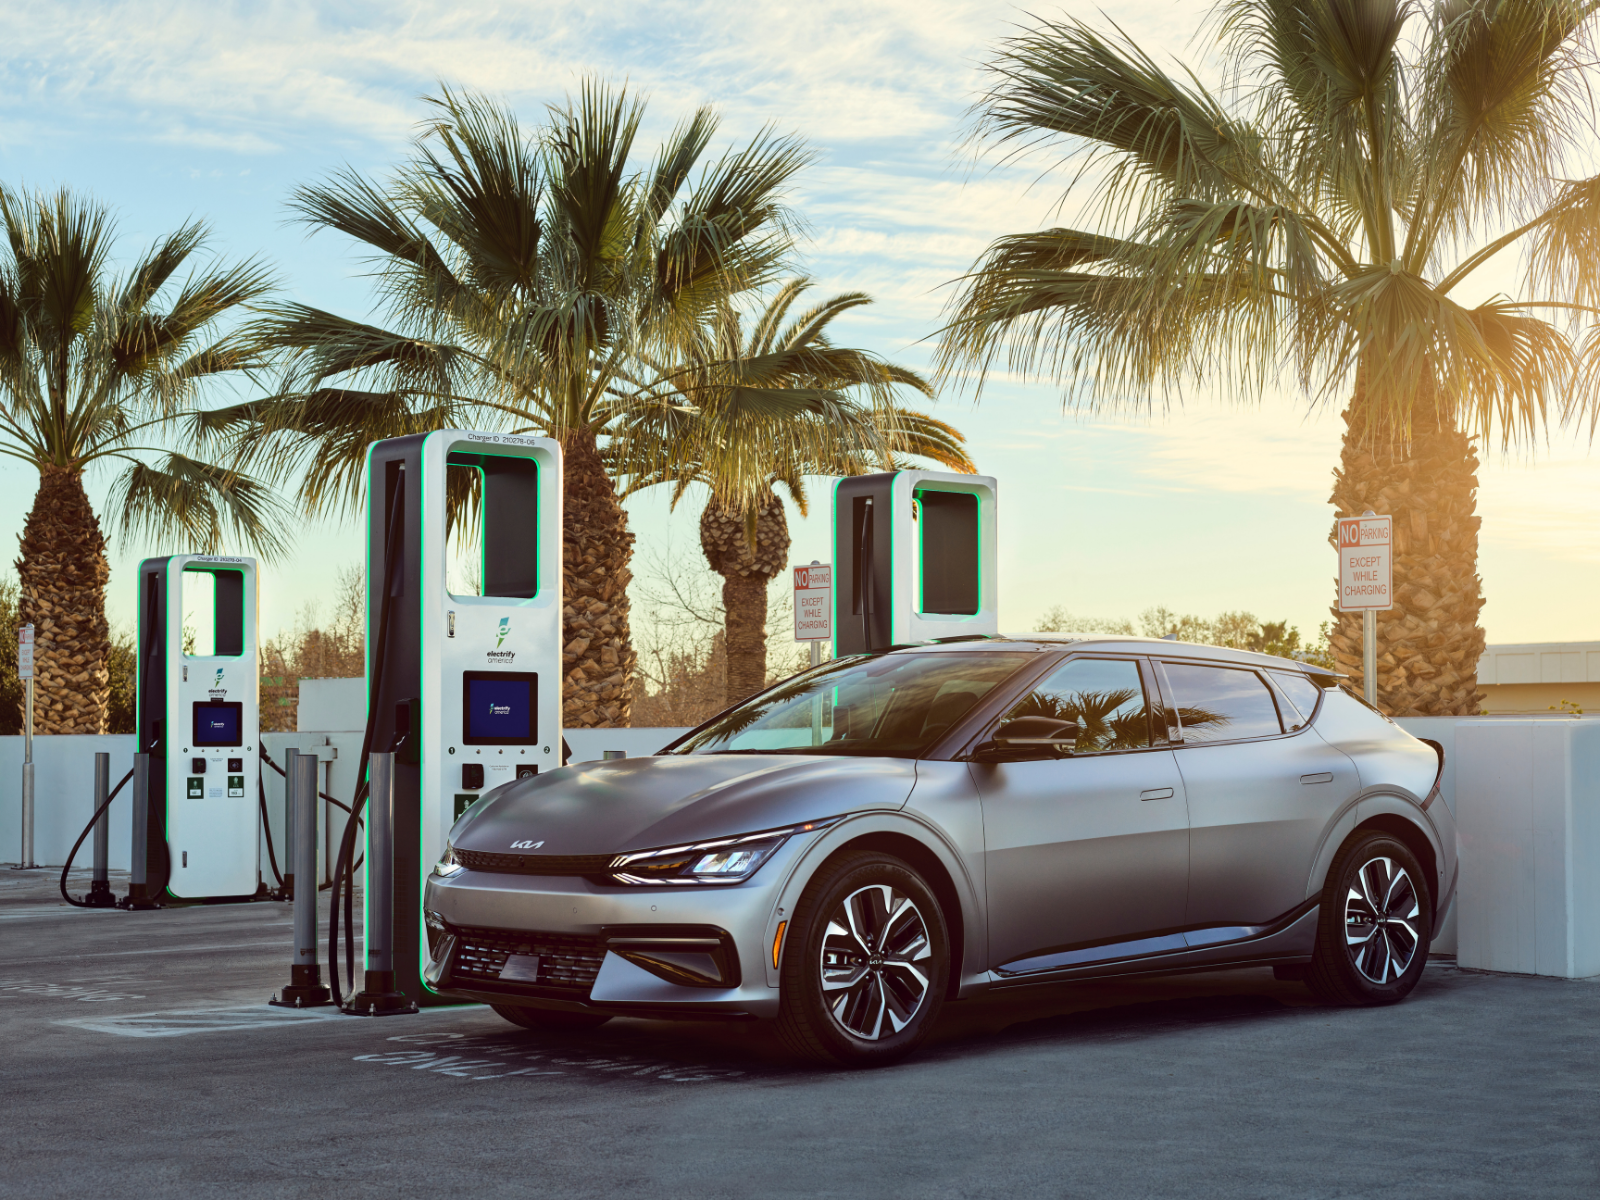 EV Buyer's Guide: The Basics Of Going Green